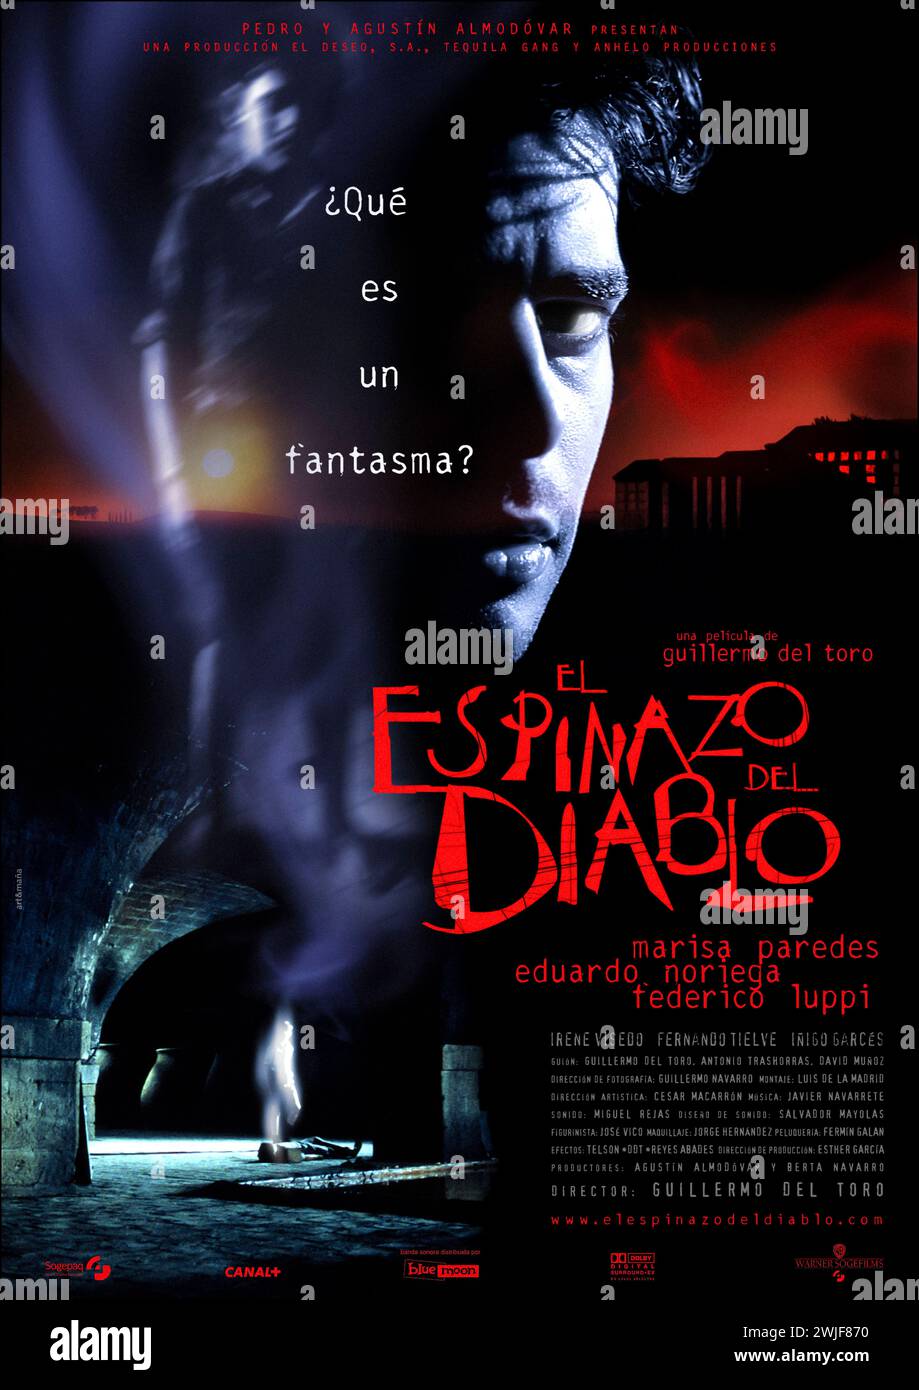 El espinazo del diablo [The Devil's Backbone] (2001) directed by Guillermo del Toro and starring Marisa Paredes, Eduardo Noriega and Federico Luppi. Set in 1939 during the Spanish Civil war, an orphan boy discovers his school is haunted and has many dark secrets. Spanish one sheet poster ***EDITORIAL USE ONLY***. Credit: BFA / Warner Sogefilms Stock Photo